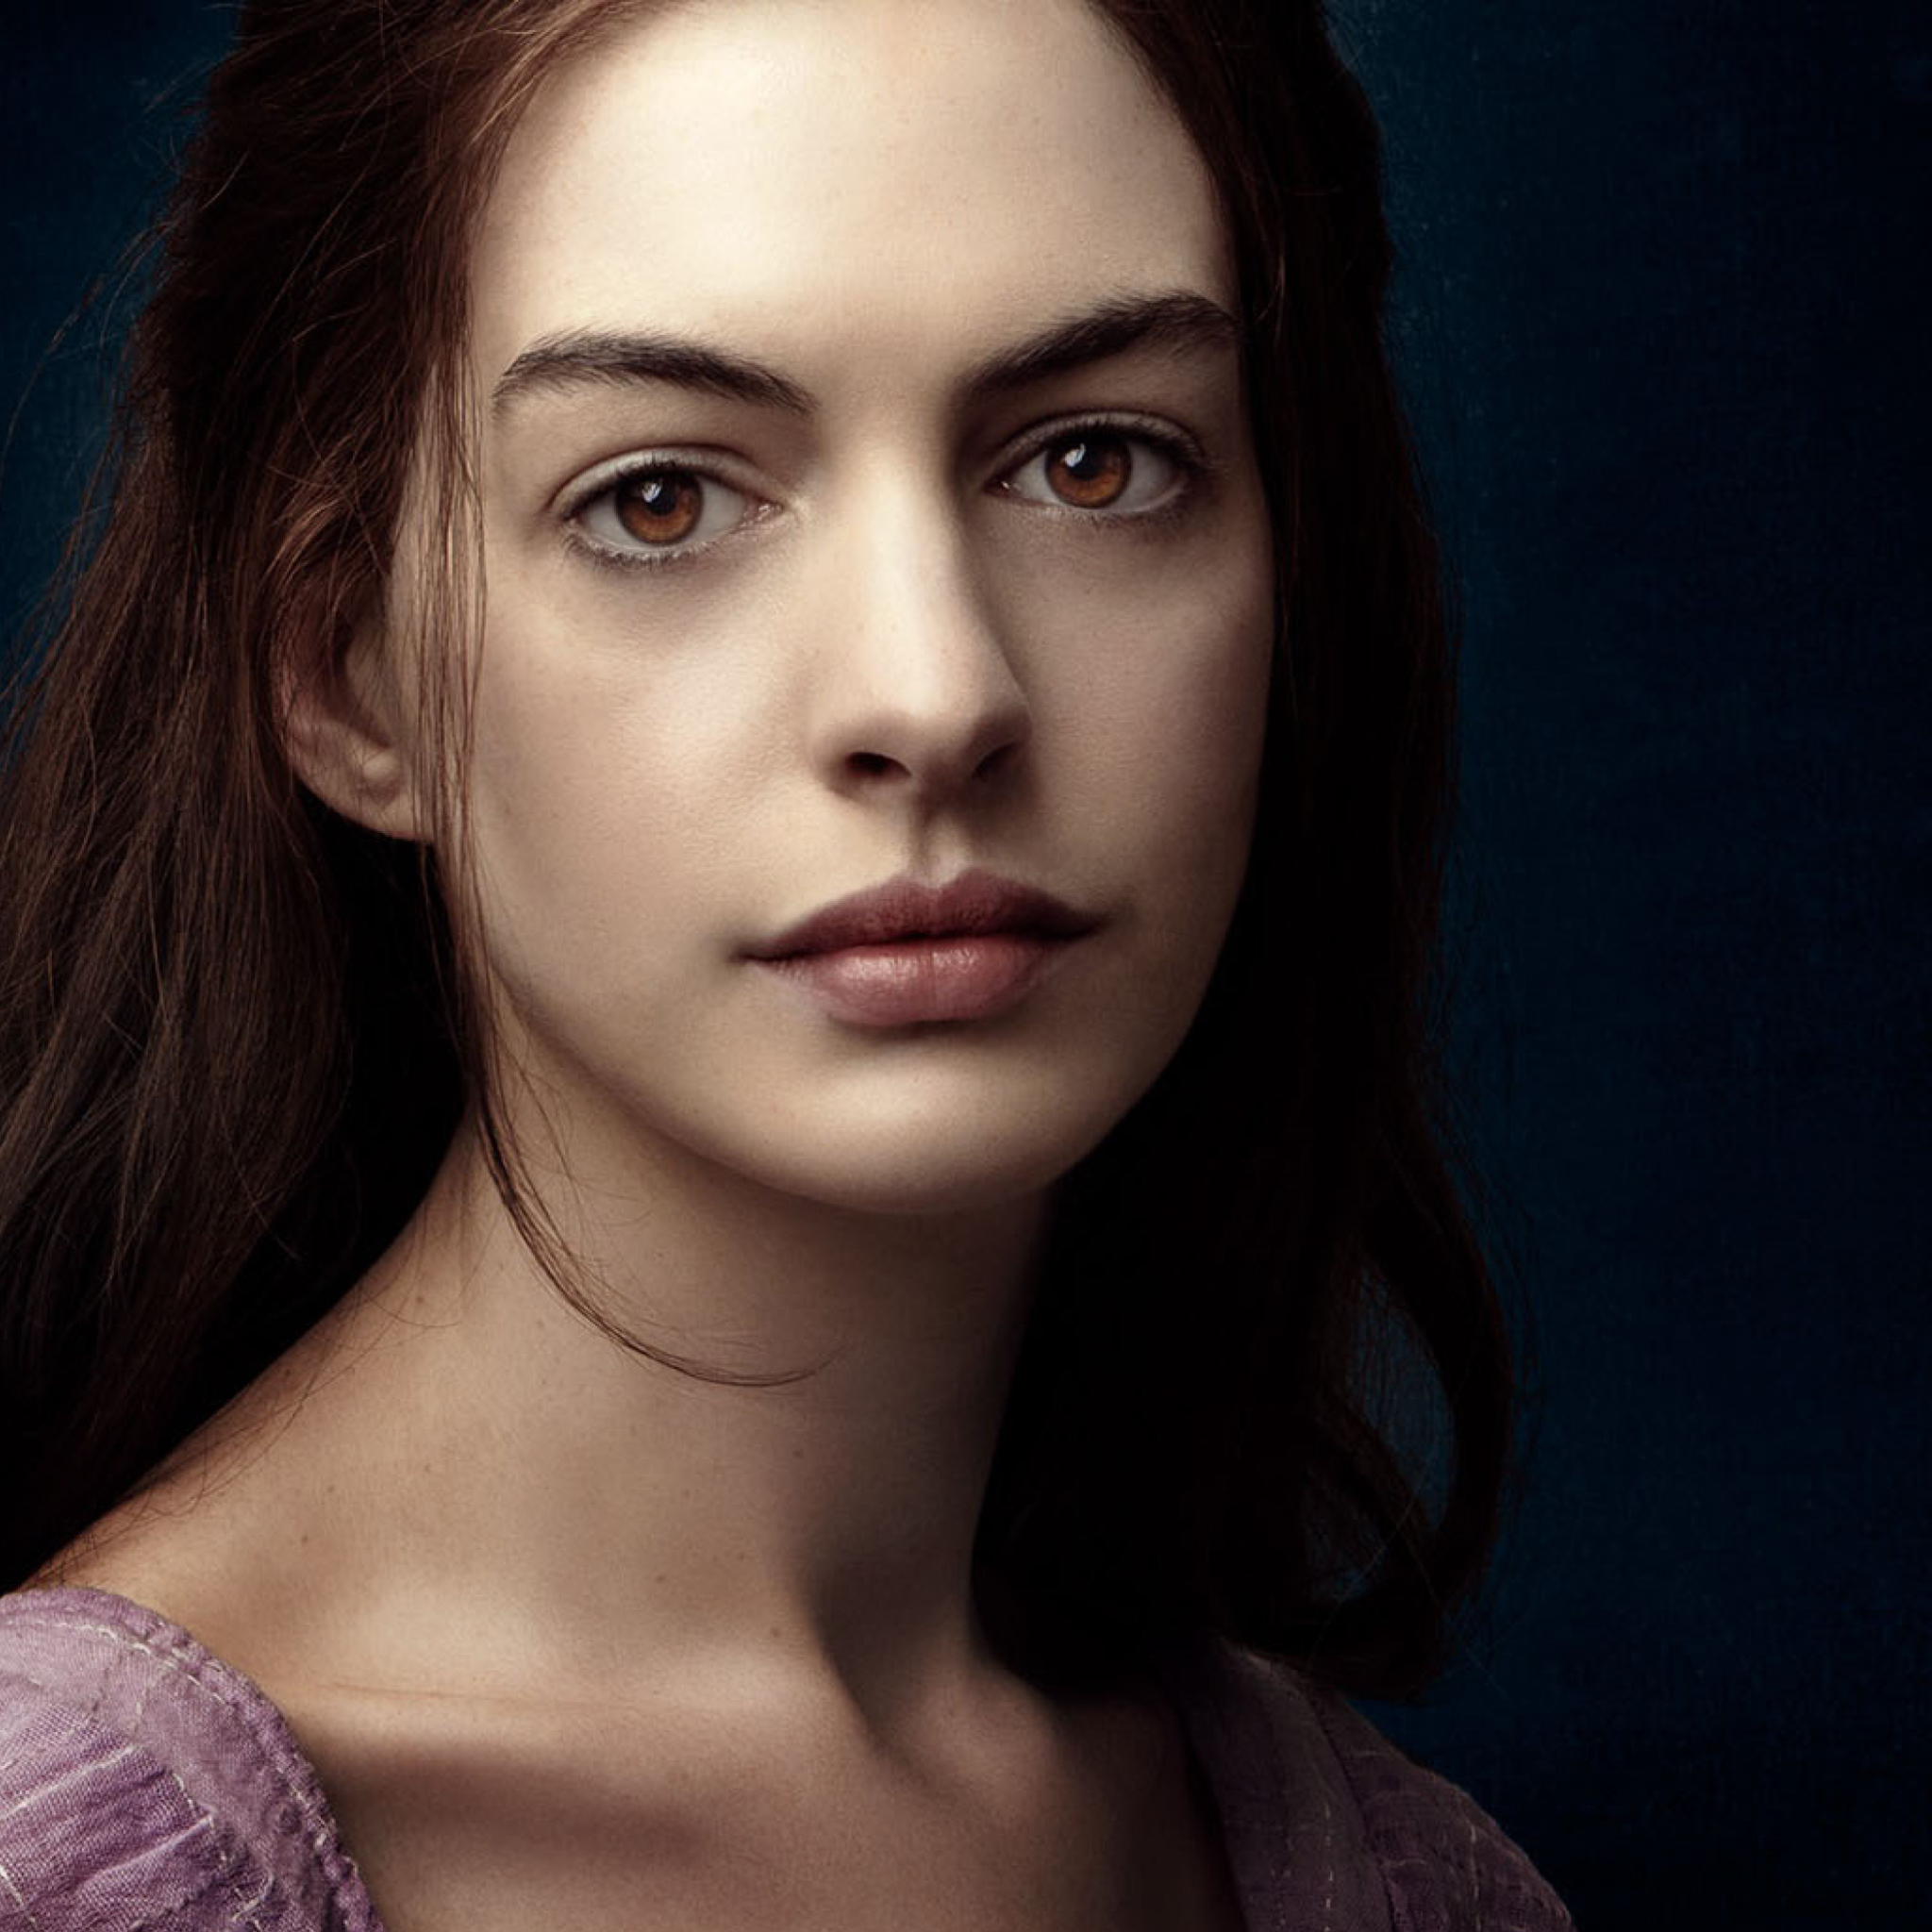 Anne Hathaway In Les Miserables screenshot #1 2048x2048